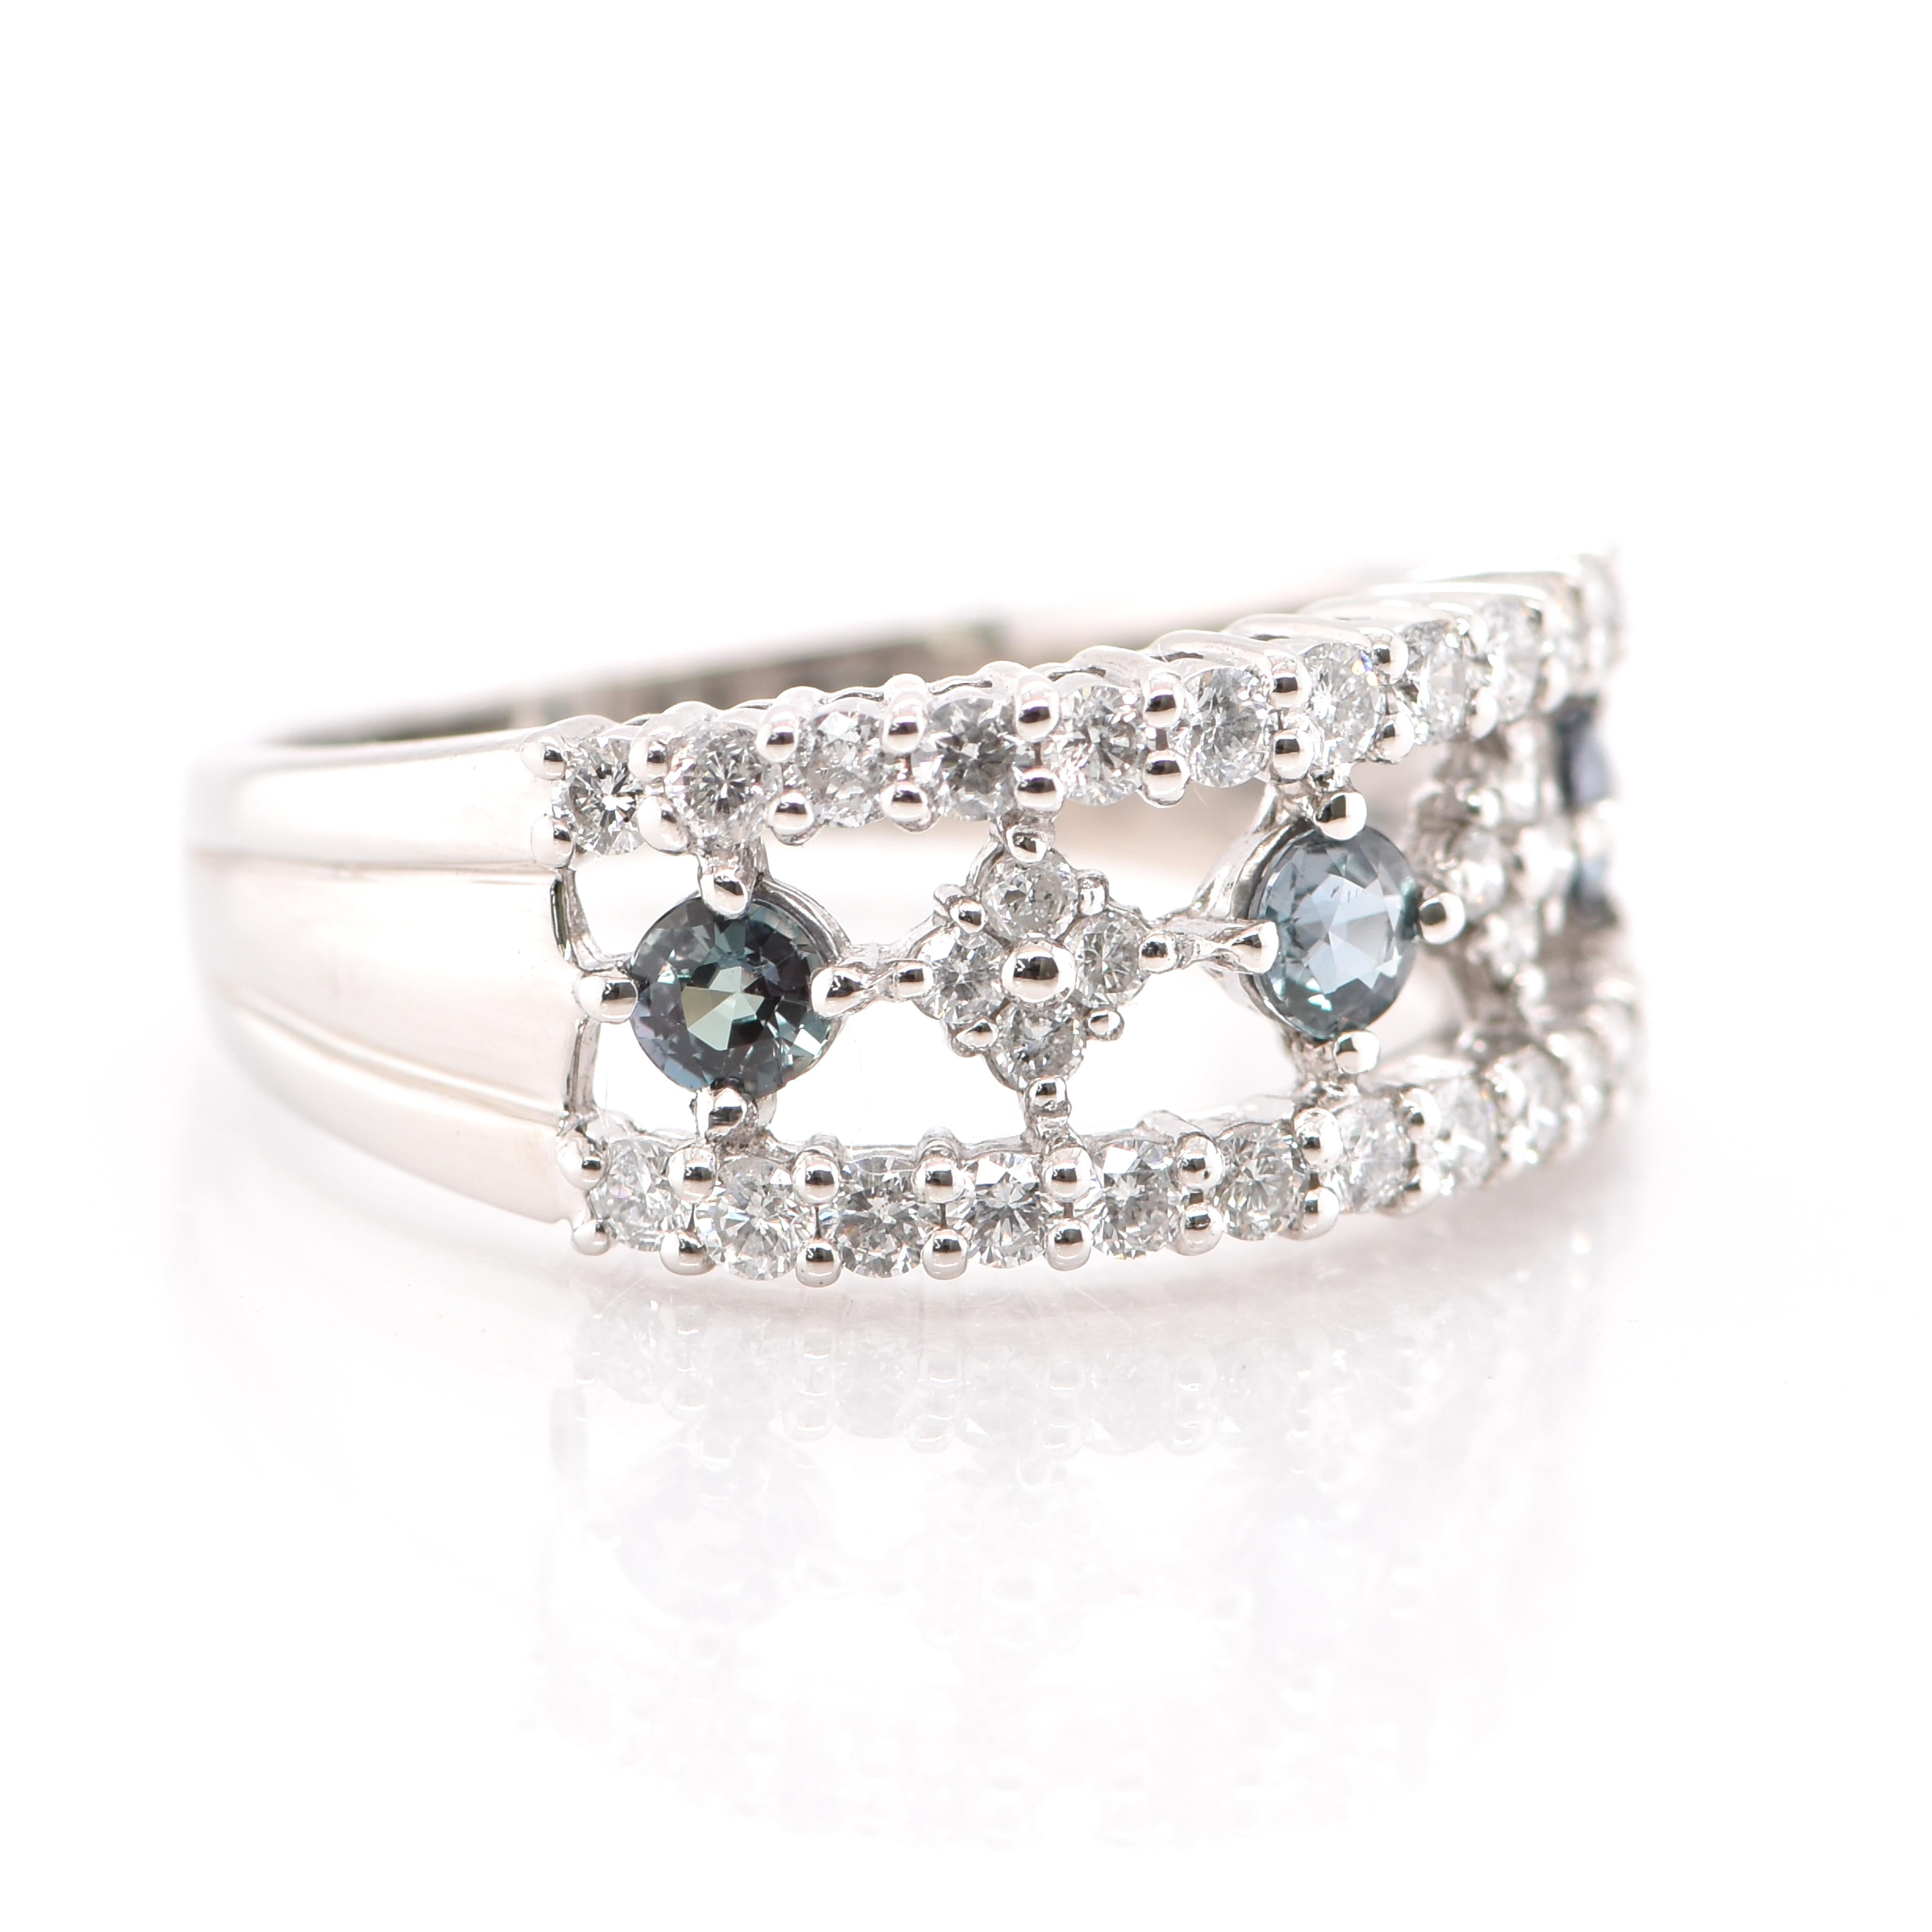 A gorgeous Cocktail Ring featuring 0.36 Carats of Natural Alexandrite and 0.57 Carats of Diamond Accents set in Platinum. Alexandrites produce a natural color-change phenomenon as they exhibit a Bluish Green Color under Fluorescent Light whereas a